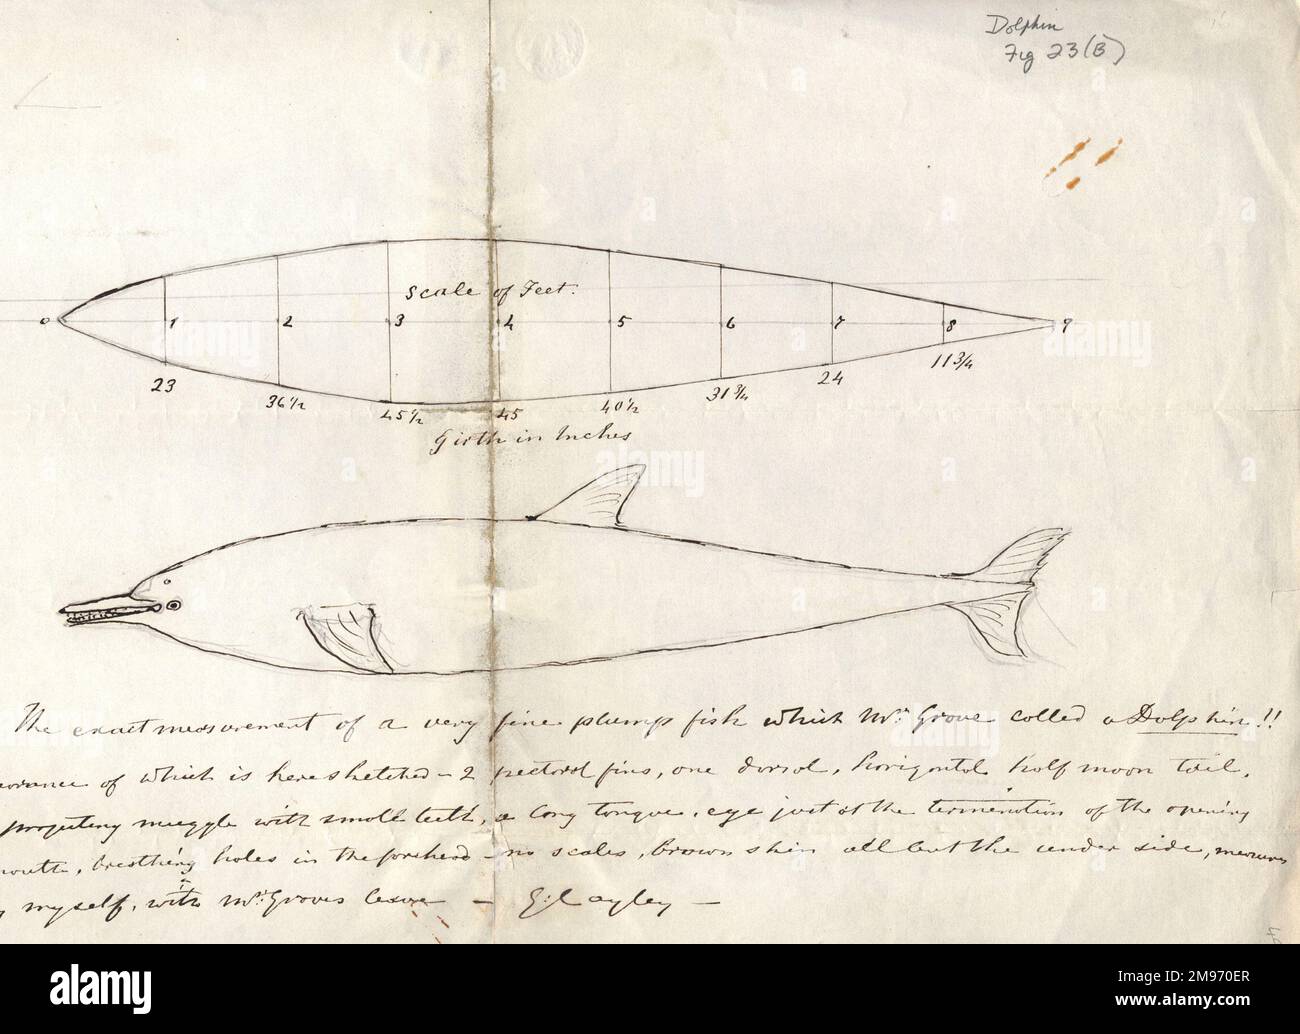 Sir George Cayley manuscript illustration. From: C.H. Gibbs-Smith Sir George Cayley’s Aeronautics 1796-1855 (London: HMSO/Science Museum. 1962) “Sketch of a dolphin, and design for a solid of least resistance based on it (undated).” Stock Photo